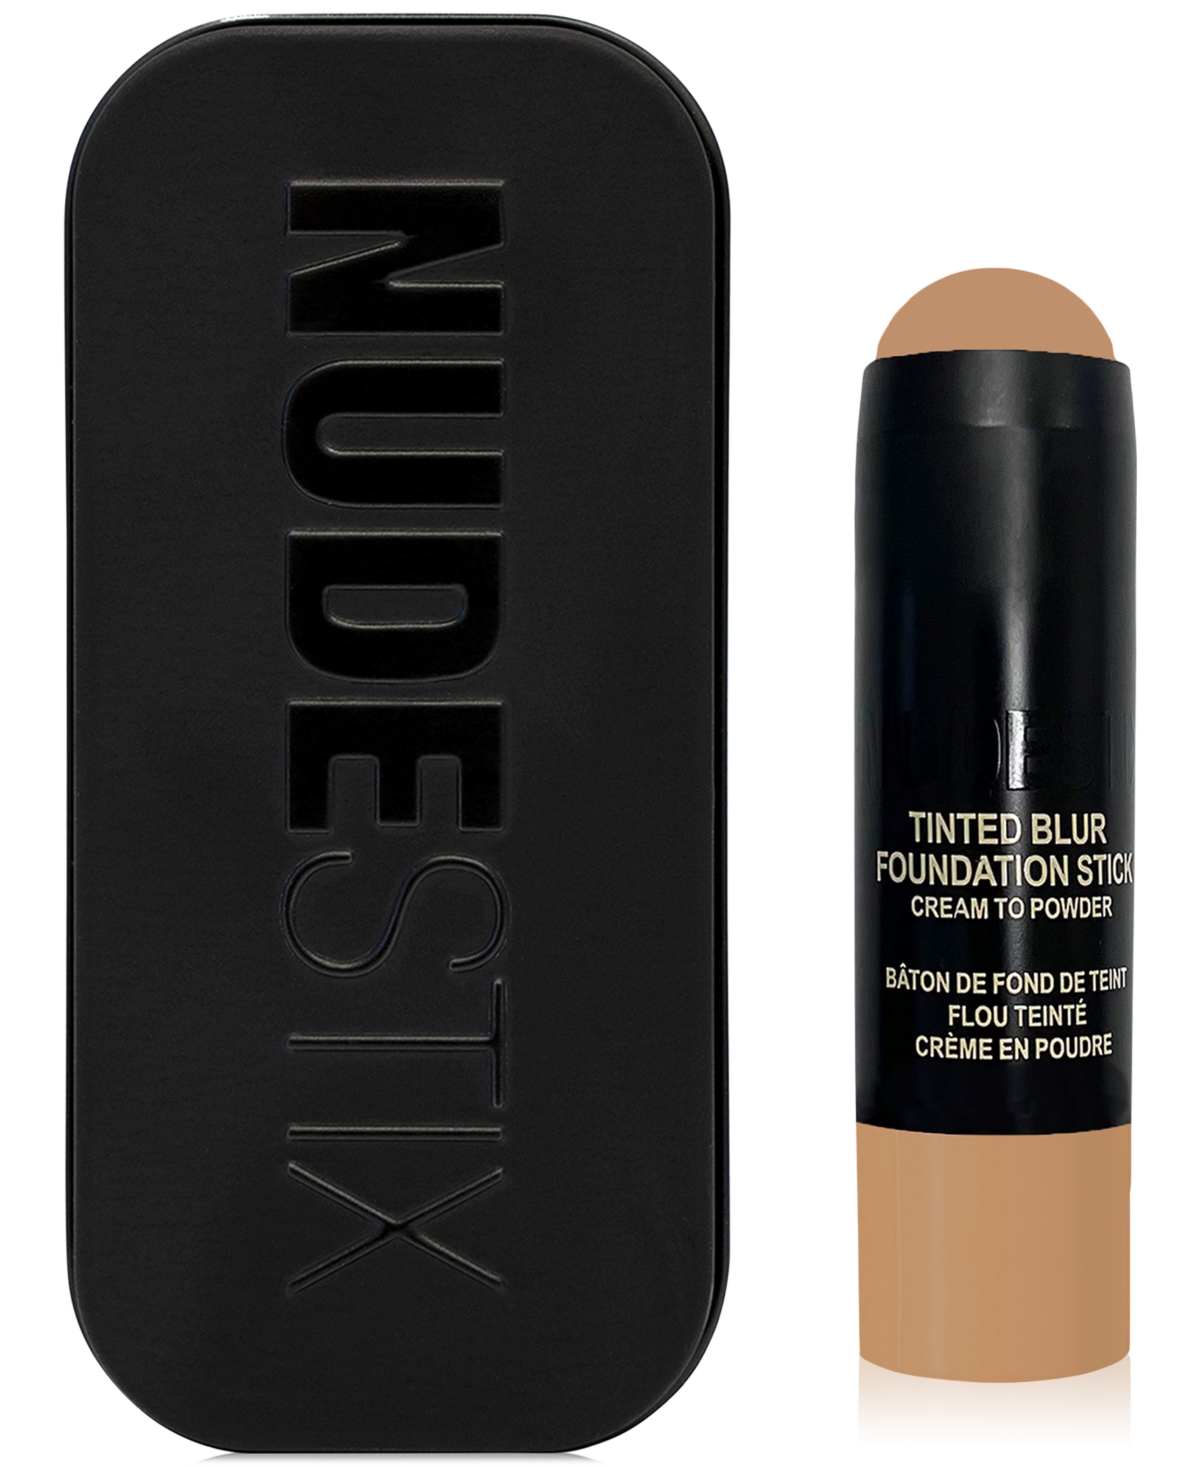 Tinted Blur Foundation Stick - Nude . (deep tan with neutral undertone)